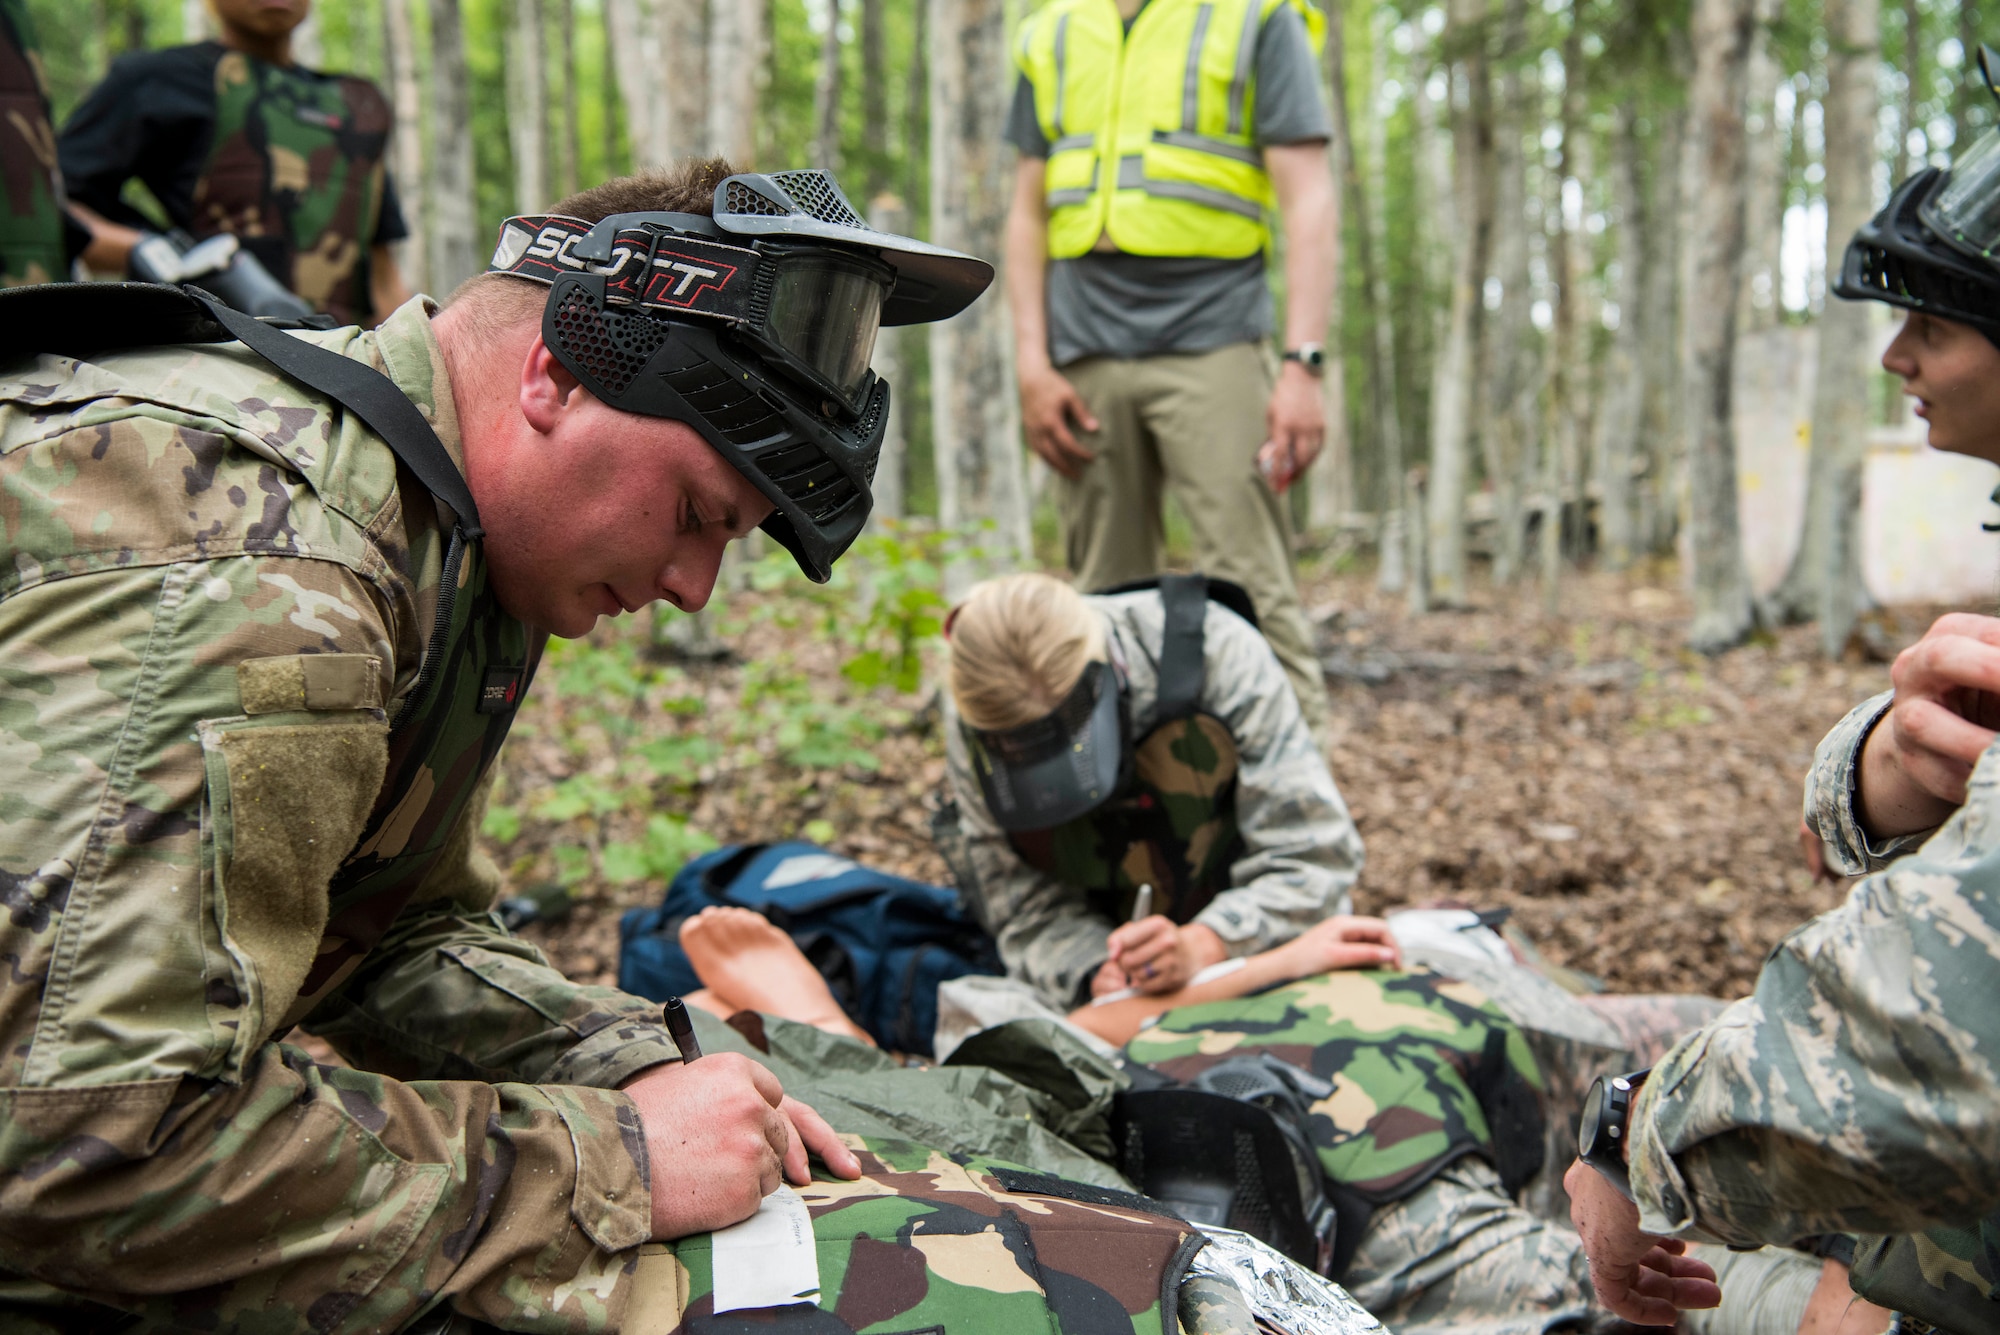 Personnel from the 673d Medical Group write an assessment during the practical application of the Tactical Combat Casualty Care course at the Warrior Extreme Paintball course at Joint Base Elmendorf-Richardson, Alaska, July 13, 2018. The course is an opportunity for every student to provide care under fire, perform tactical field care on those who are injured and execute a tactical evacuation.